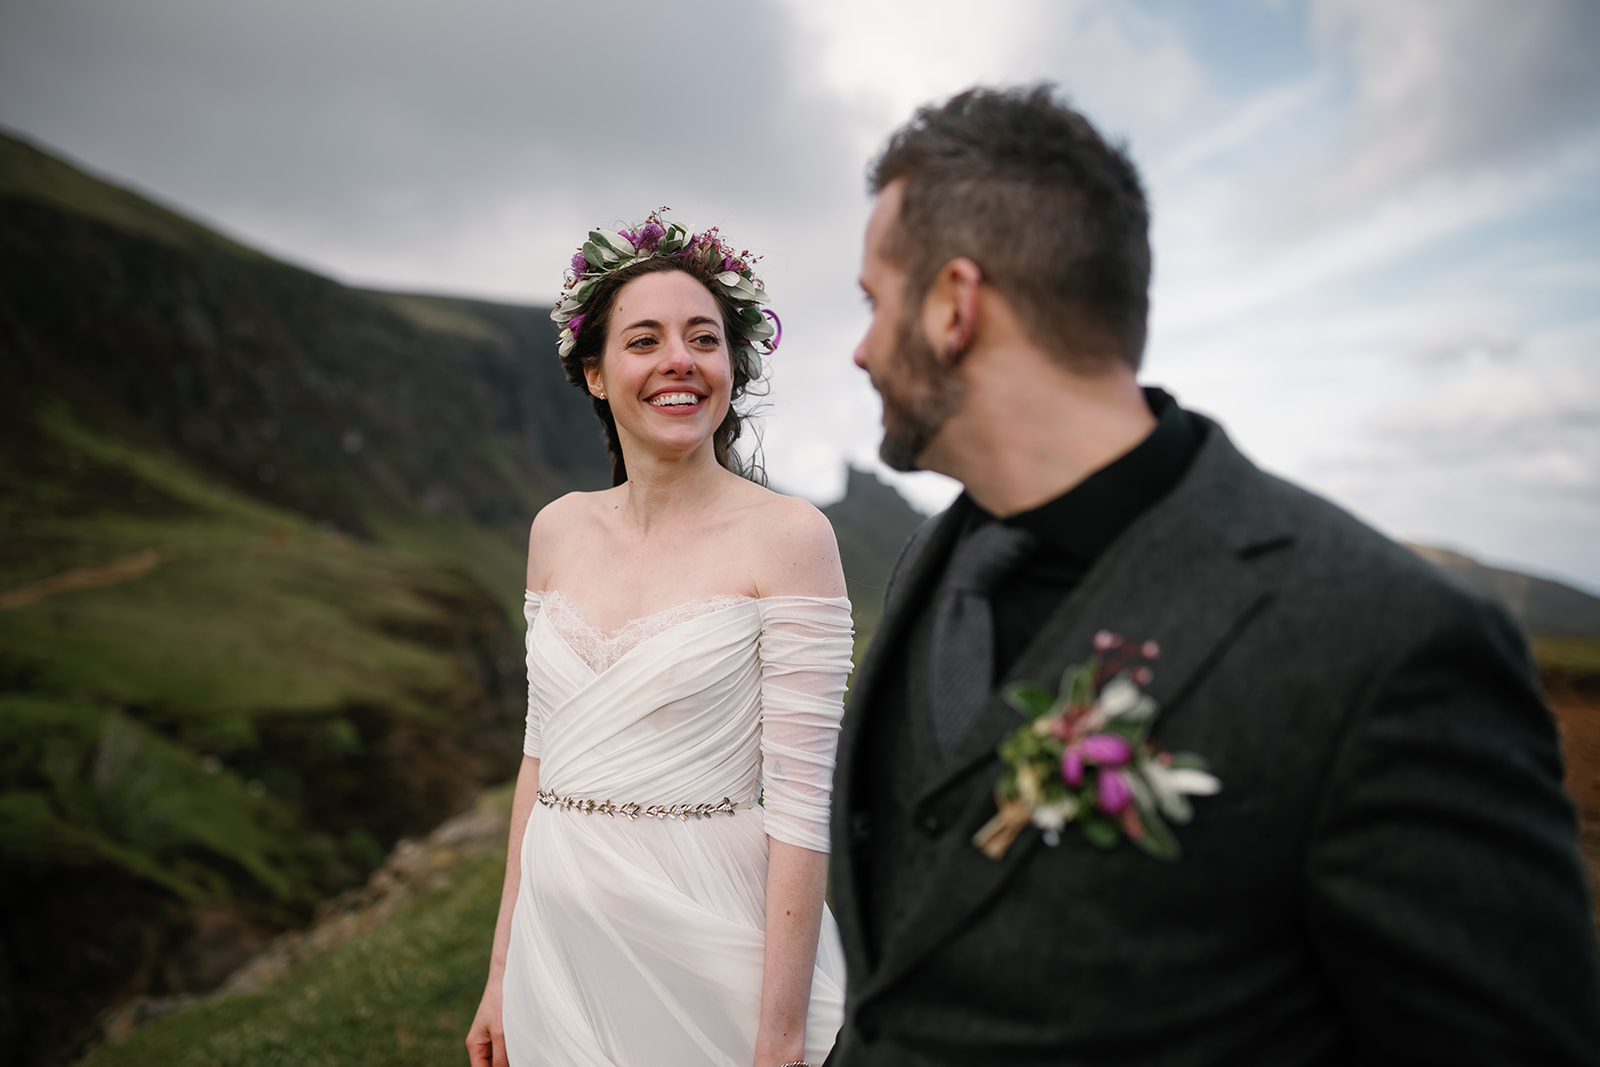 Becca and Nick, framed by the beautiful Quiraing, share a moment of pure joy during their elopement day